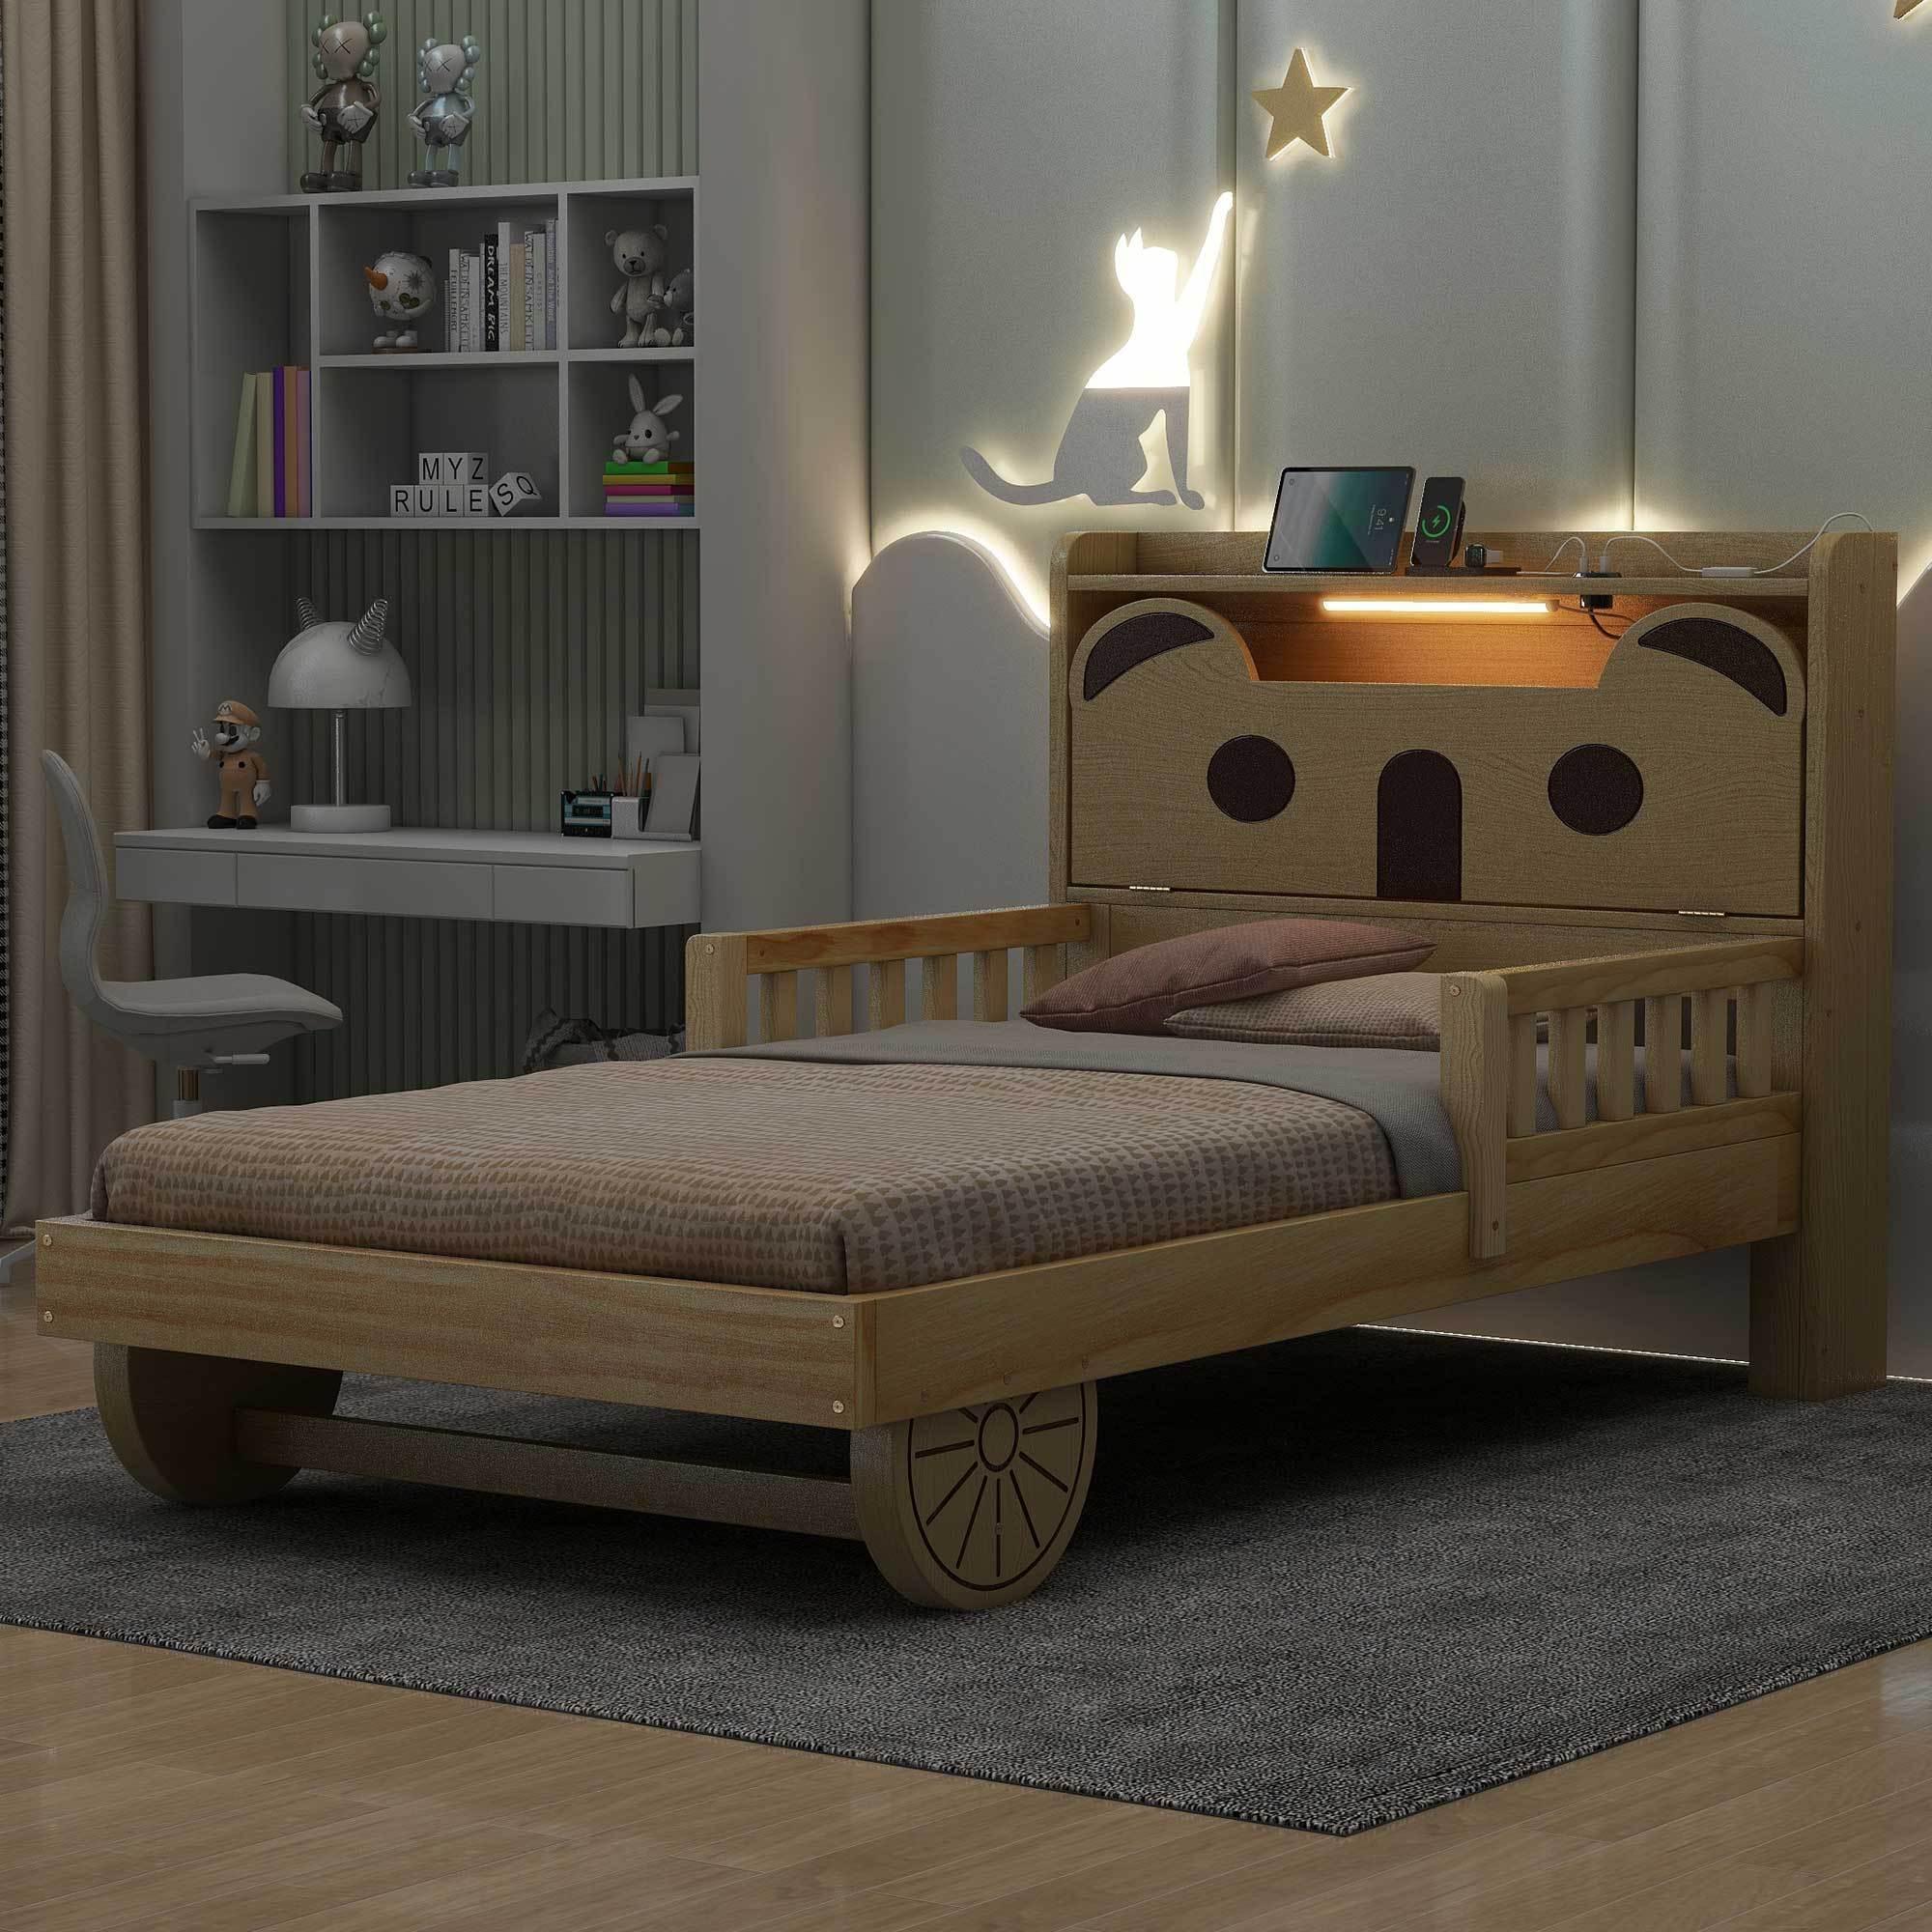 🆓🚛 Twin Size Car Bed With Bear-Shaped Headboard, Usb & Led, Natural